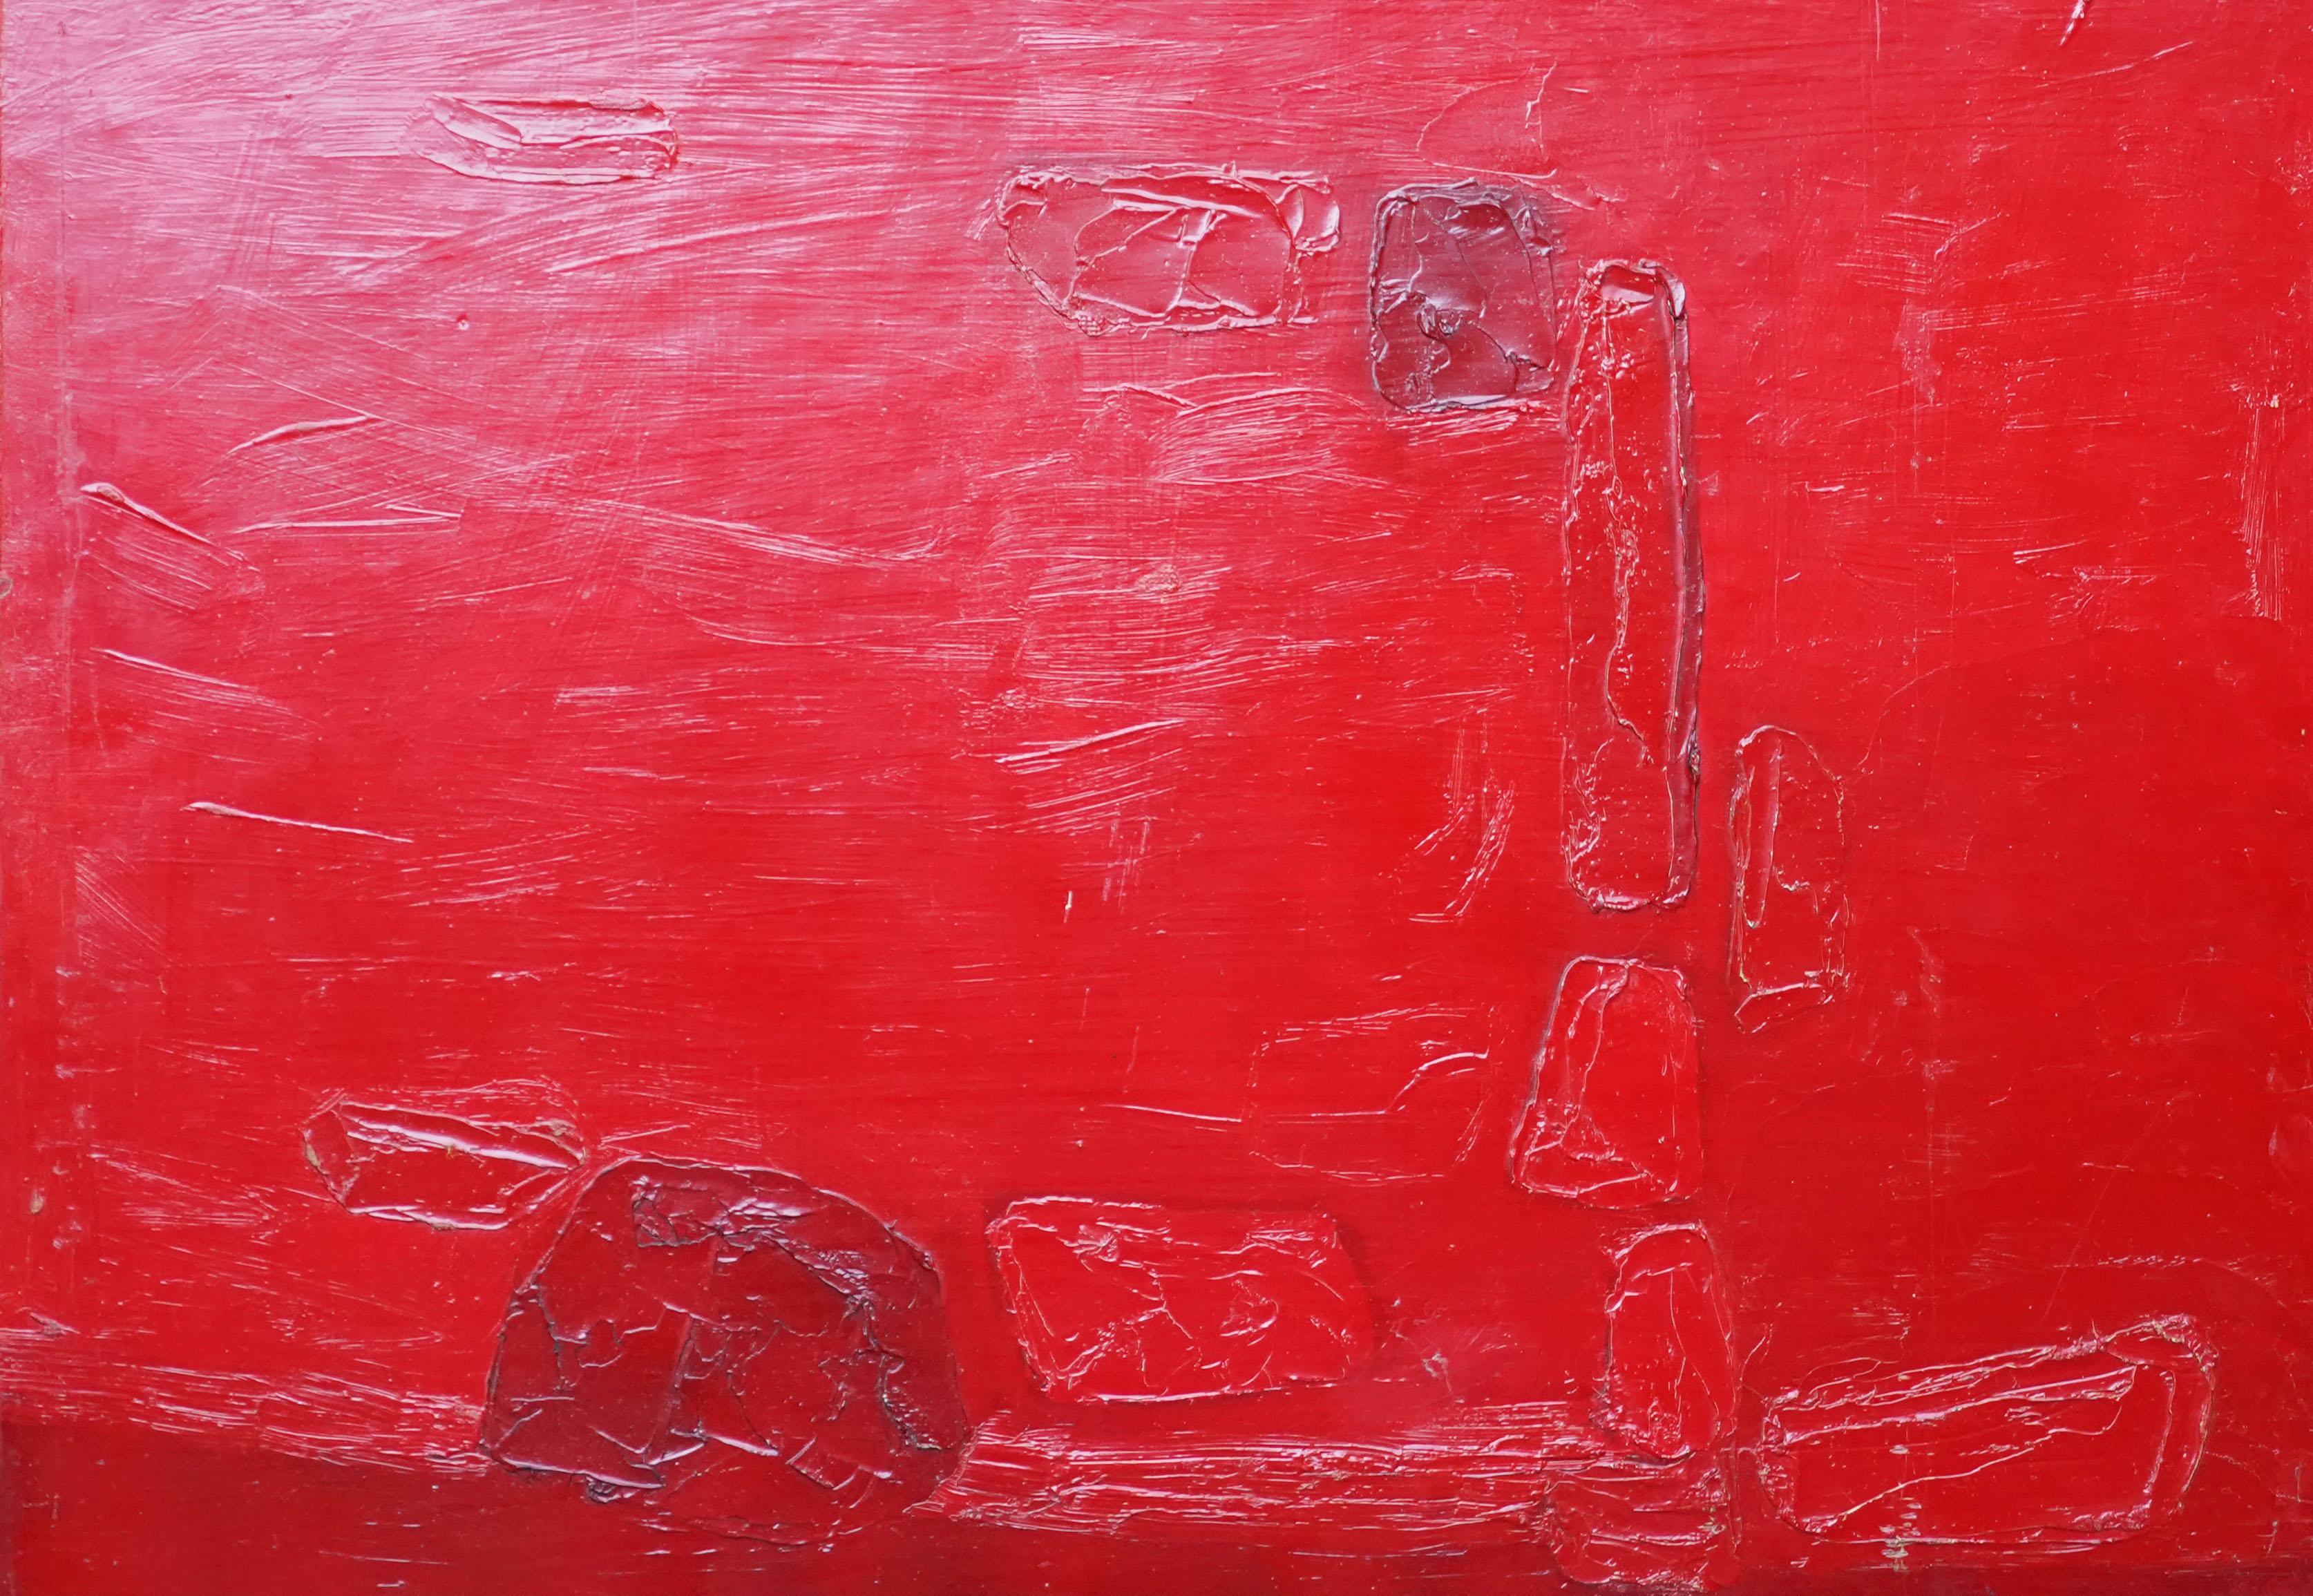 Red Abstract - British 1960 abstract art oil painting  - Painting by Peter L. Field